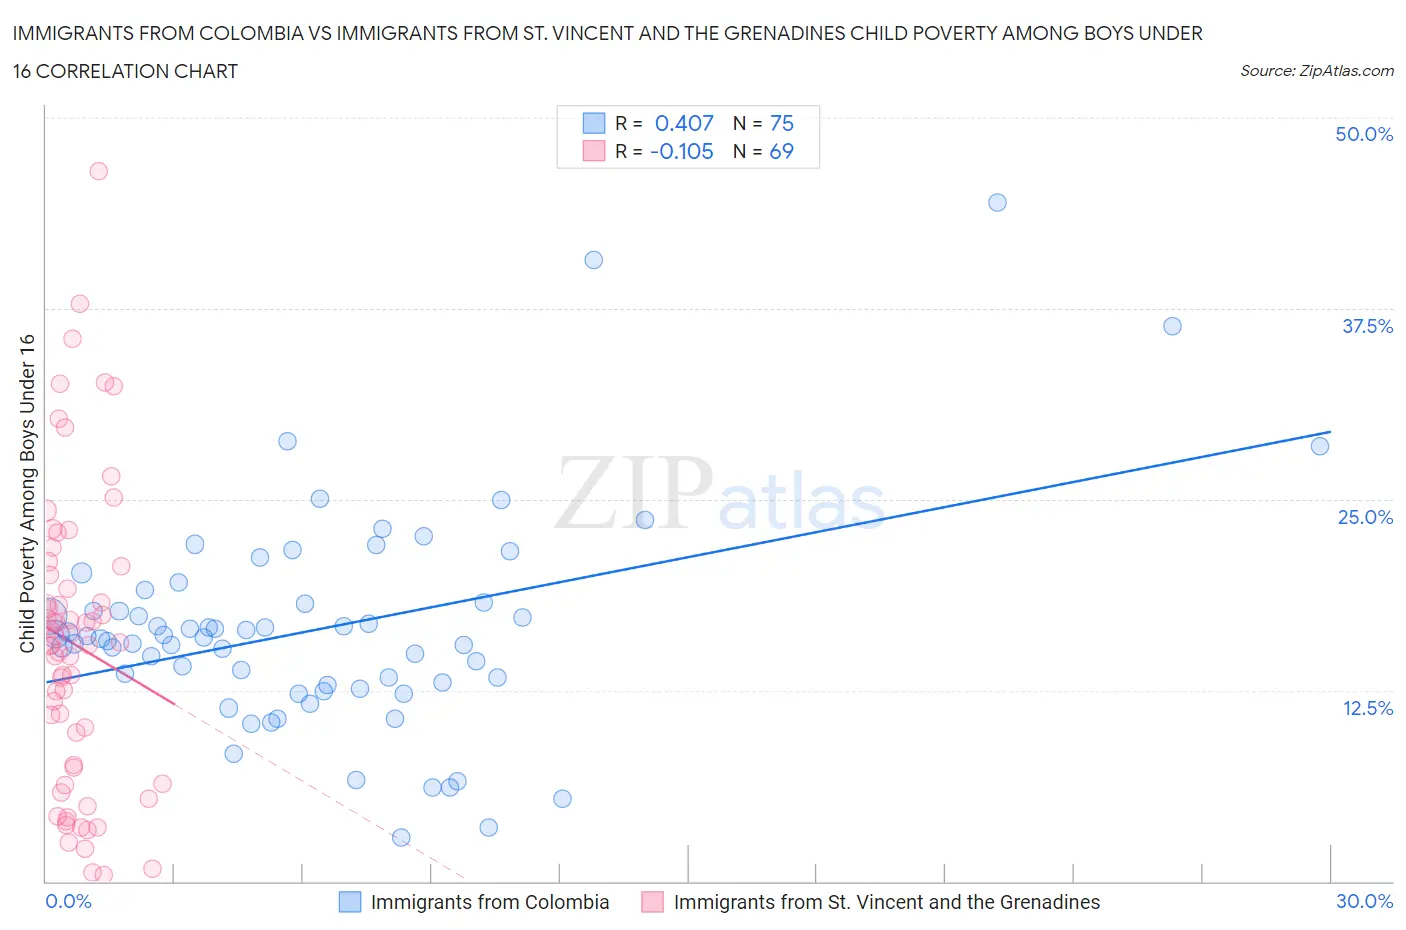 Immigrants from Colombia vs Immigrants from St. Vincent and the Grenadines Child Poverty Among Boys Under 16